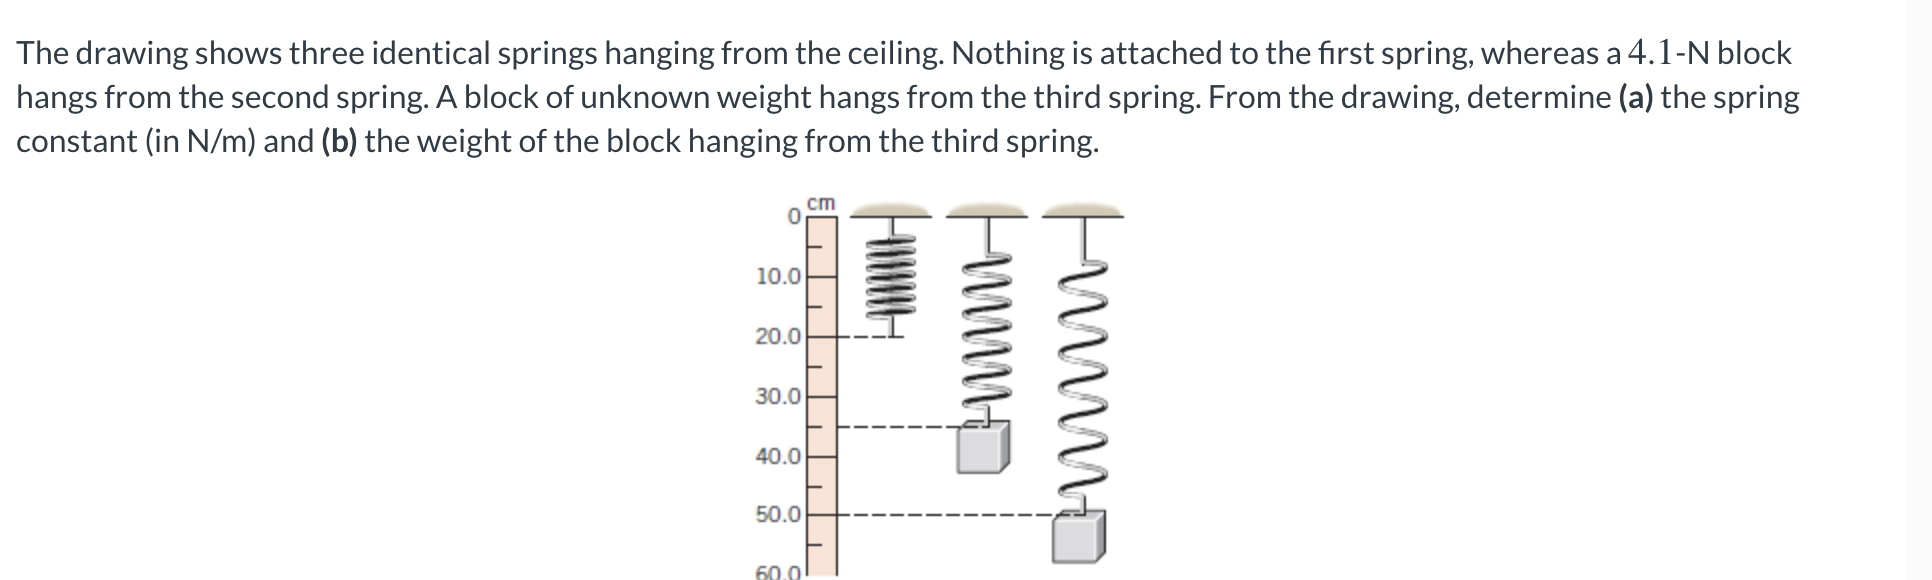 Solved The drawing shows three identical springs hanging